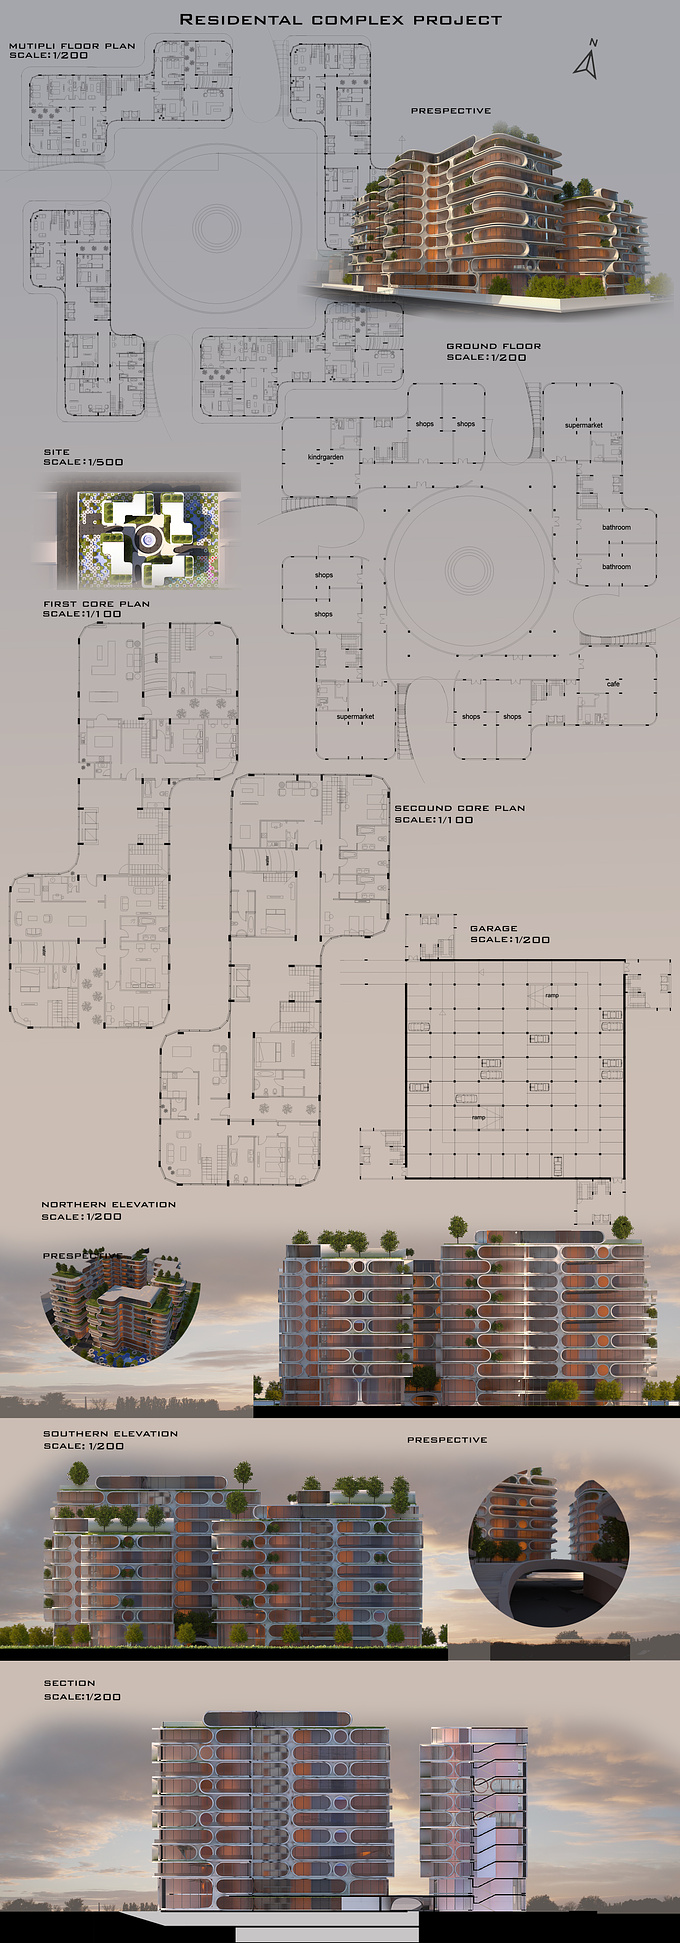 the residential complex project used 3dmax/vray/photoshop/autocad